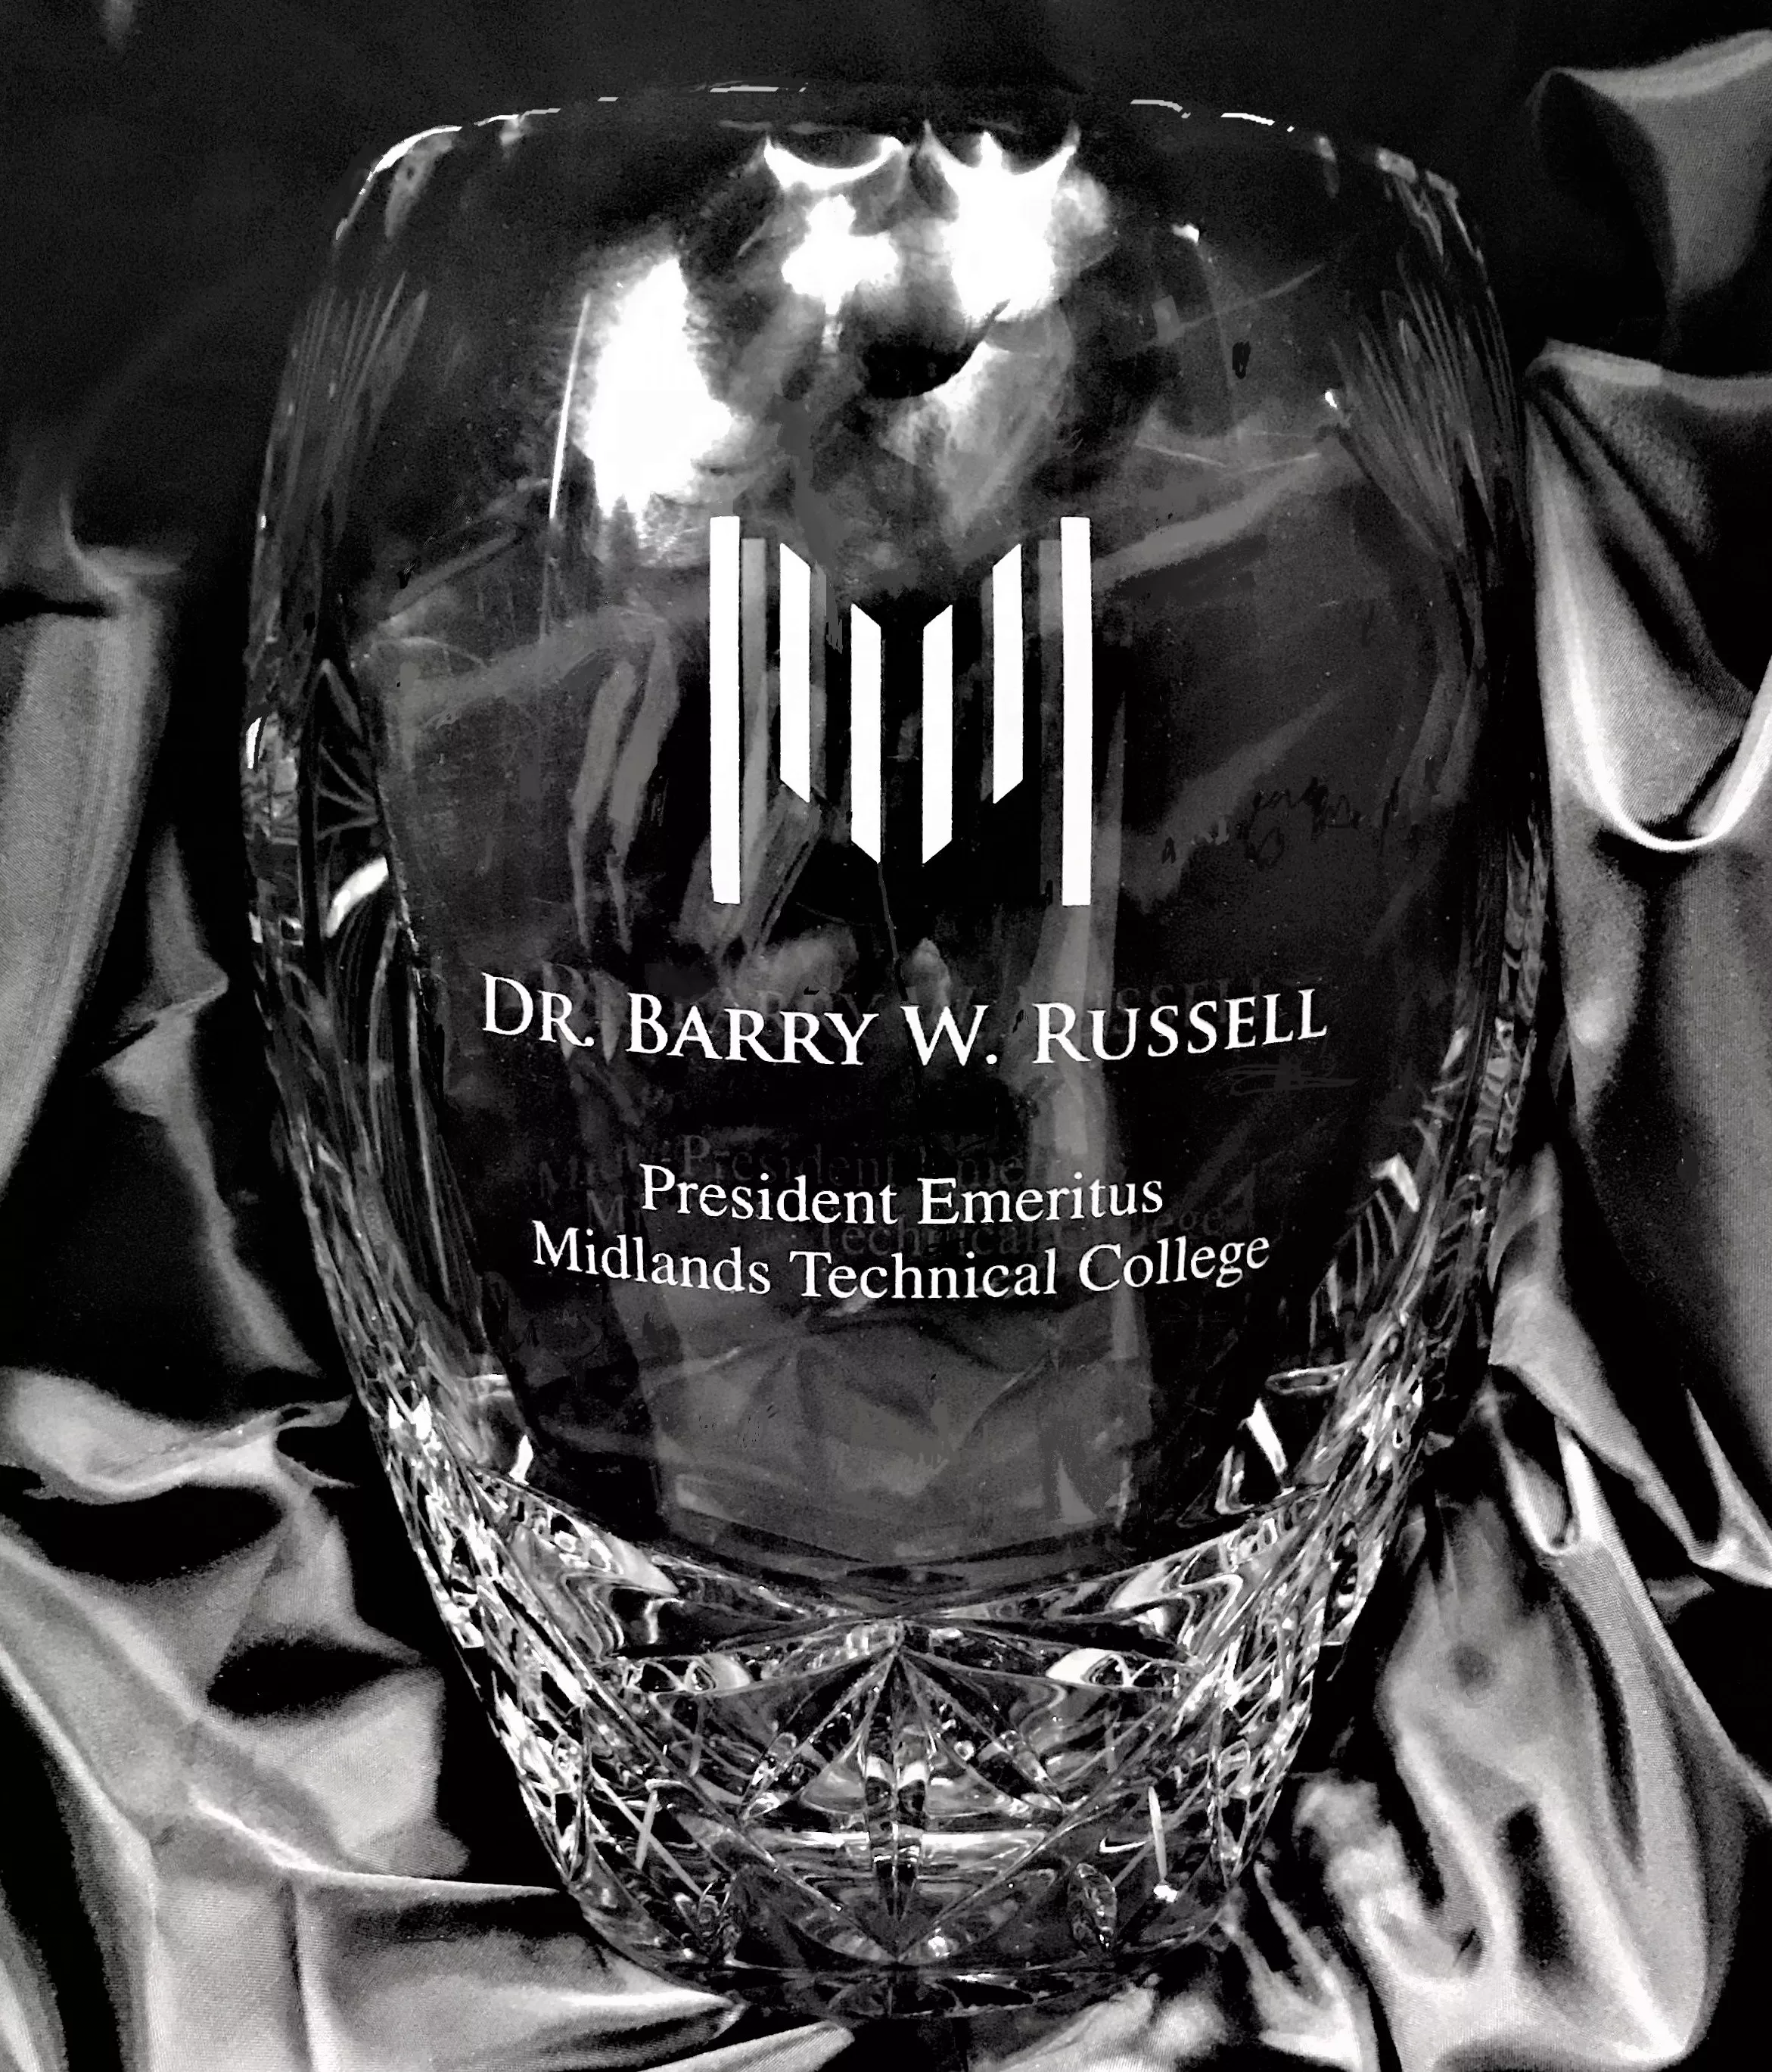 A vase honors Dr. Barry W. Russell as President Emeritus